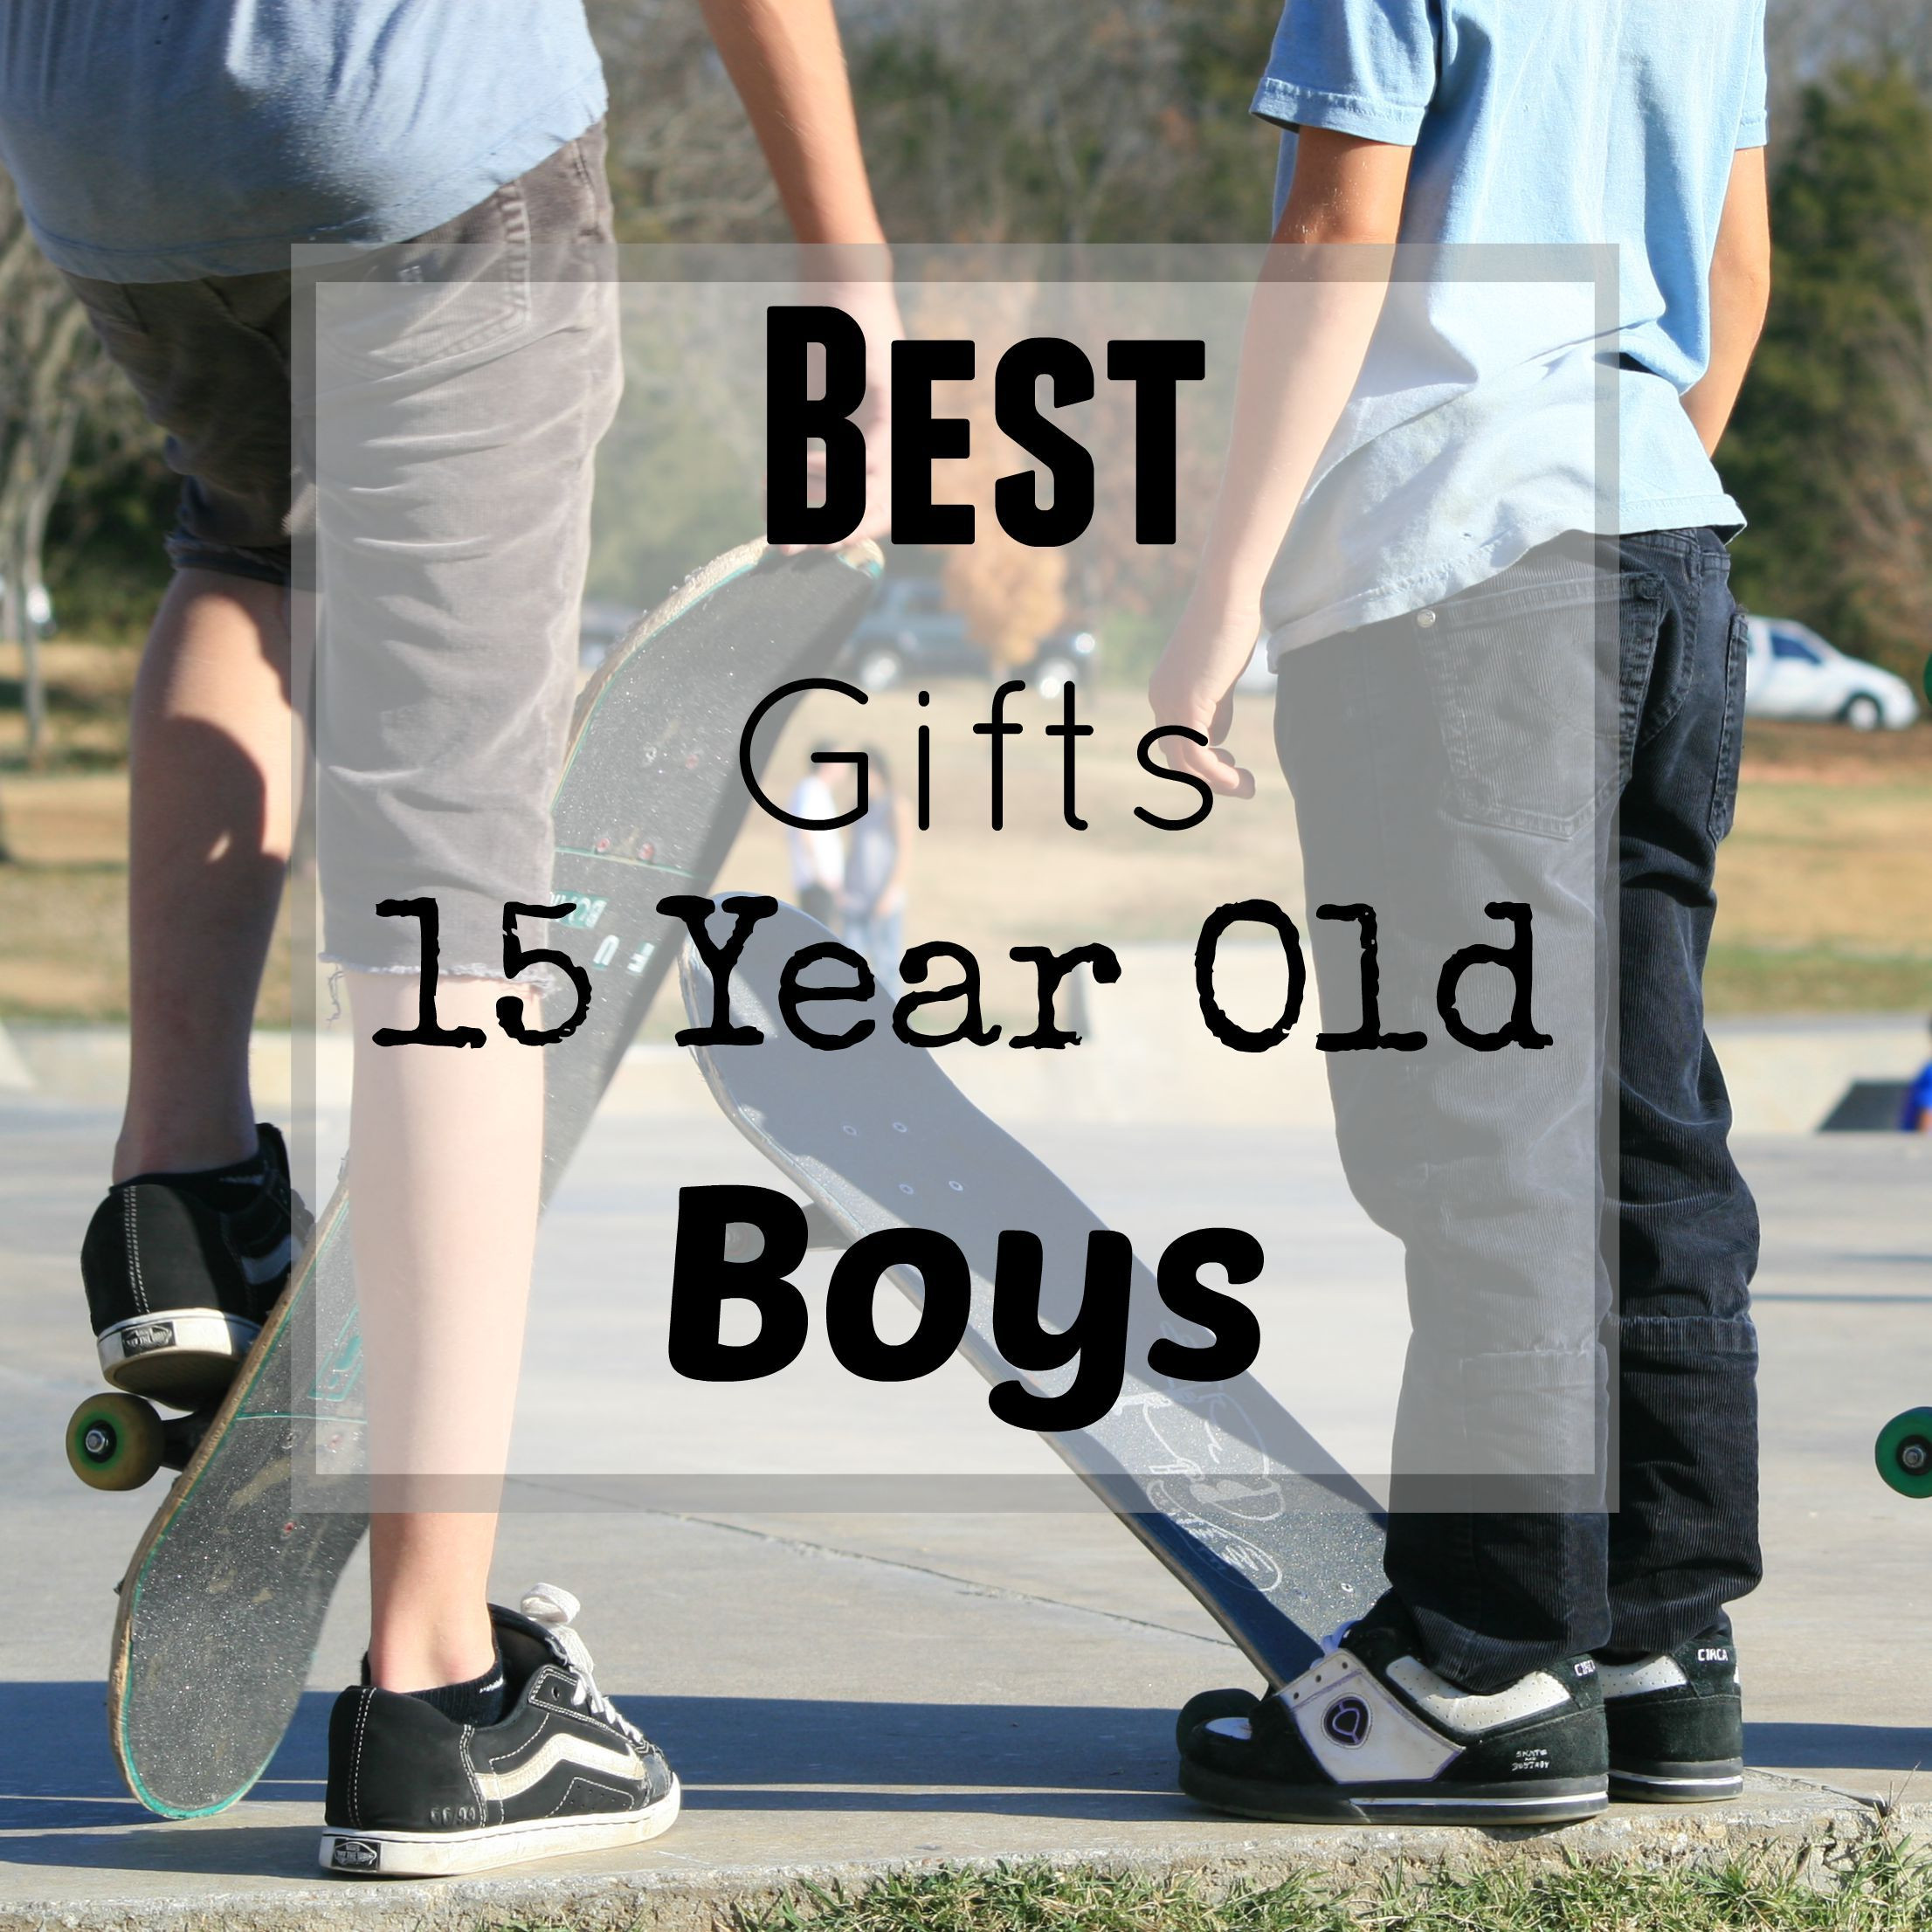 Gift Ideas For 15 Year Old Boys
 Pin on Best Gifts for Teen Boys